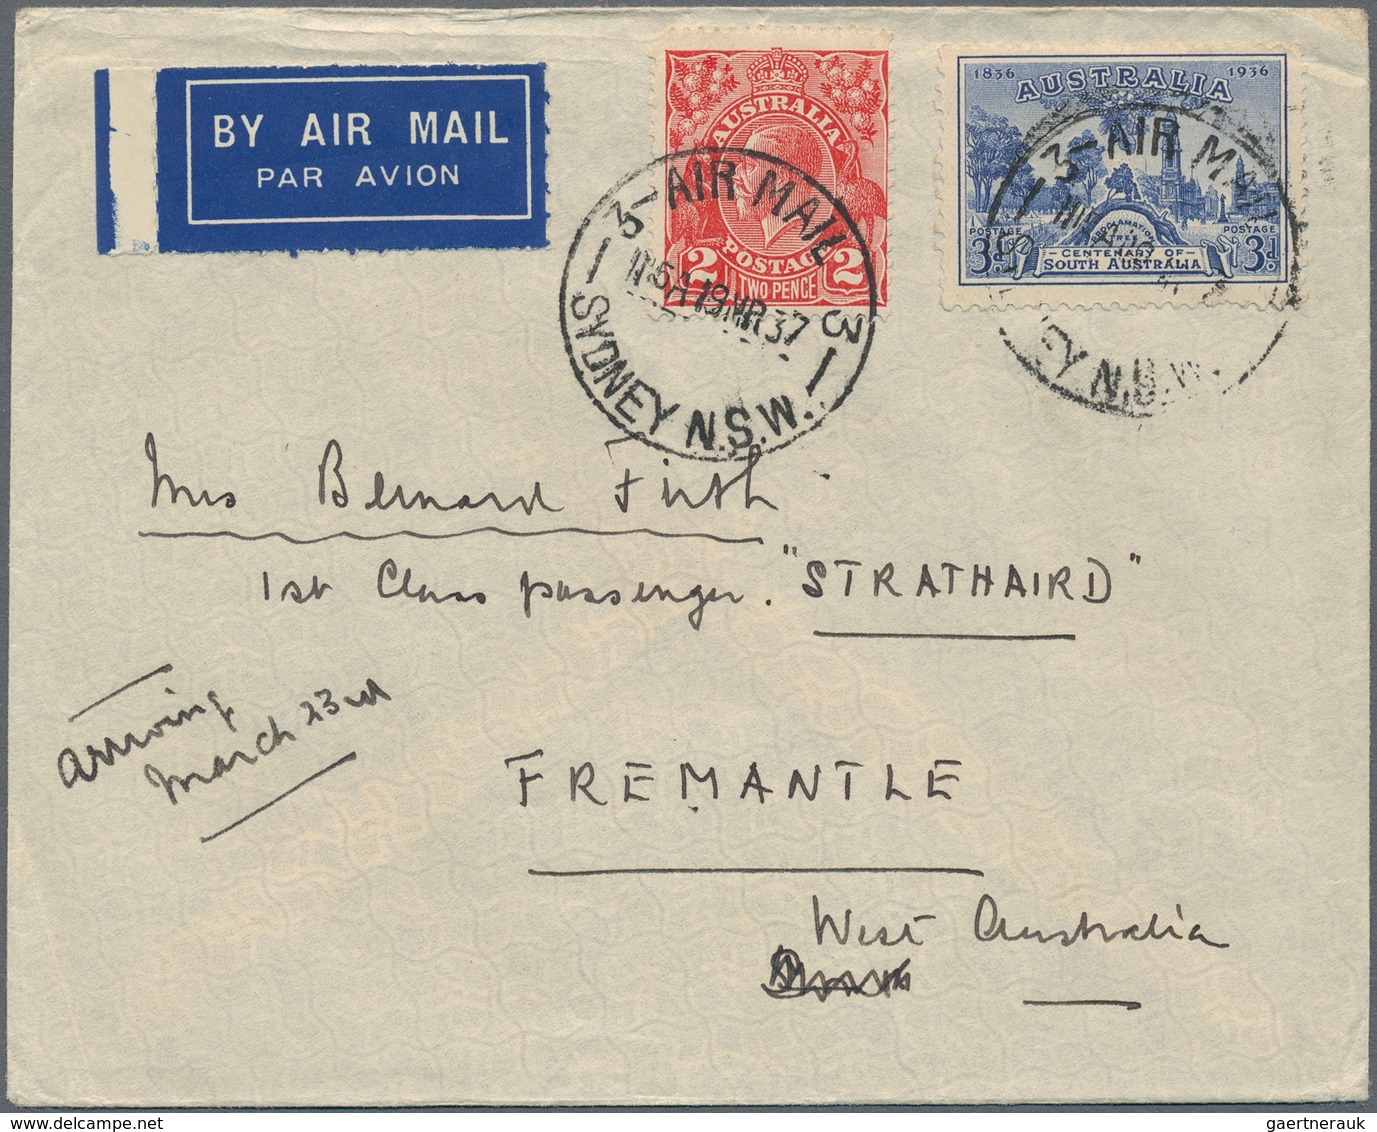 Australien: 1927/66, ca. 90 covers (inc. one ppc) mostly used to Switzerland with WWII censorship us